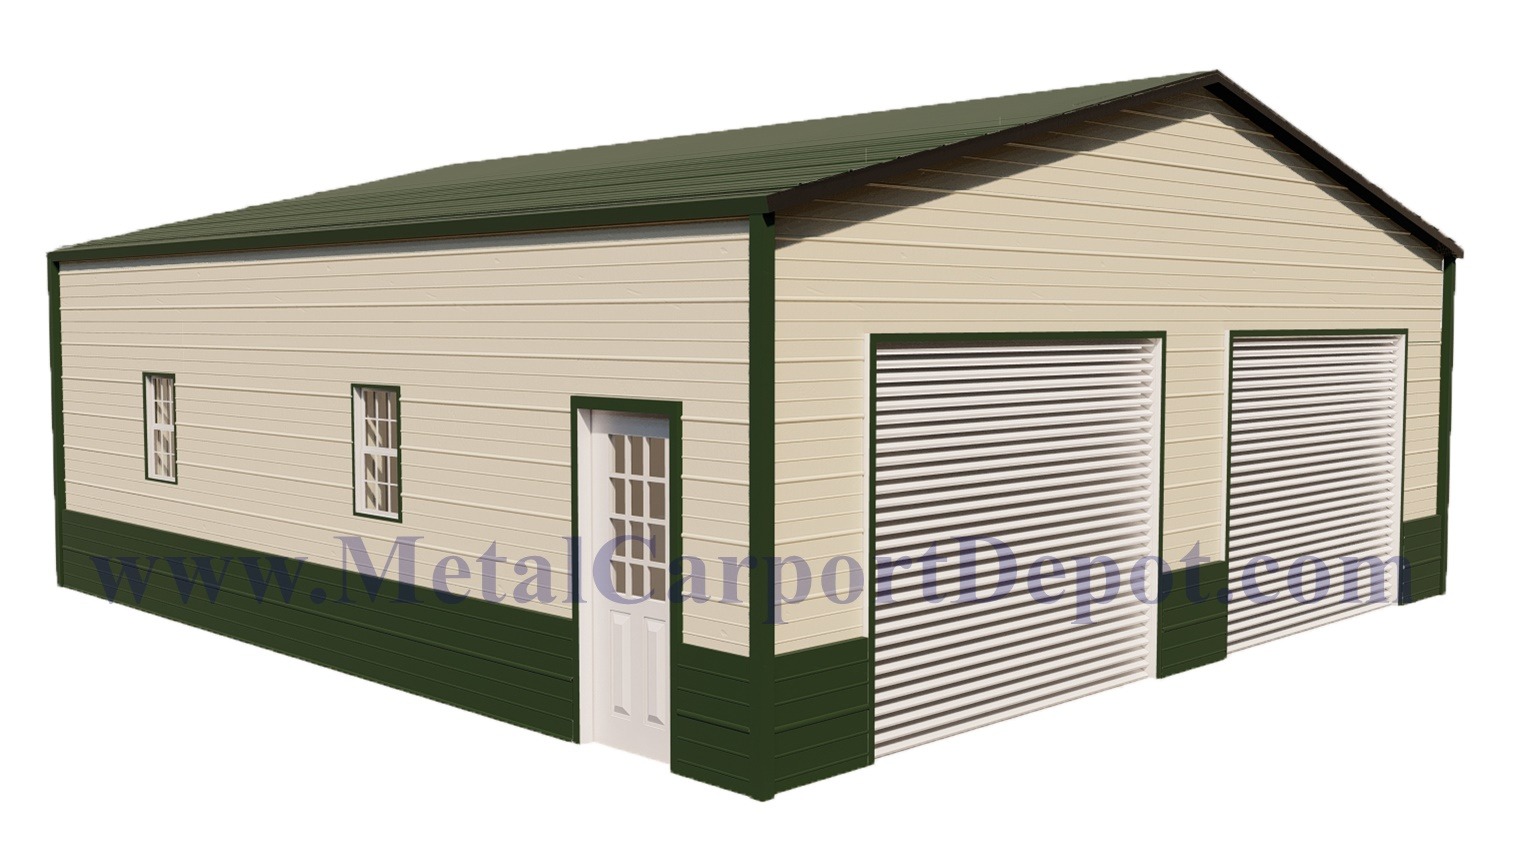 Boxed Eave Style Fully Enclosed Metal Garage With 29 Gauge Horizontal Roof